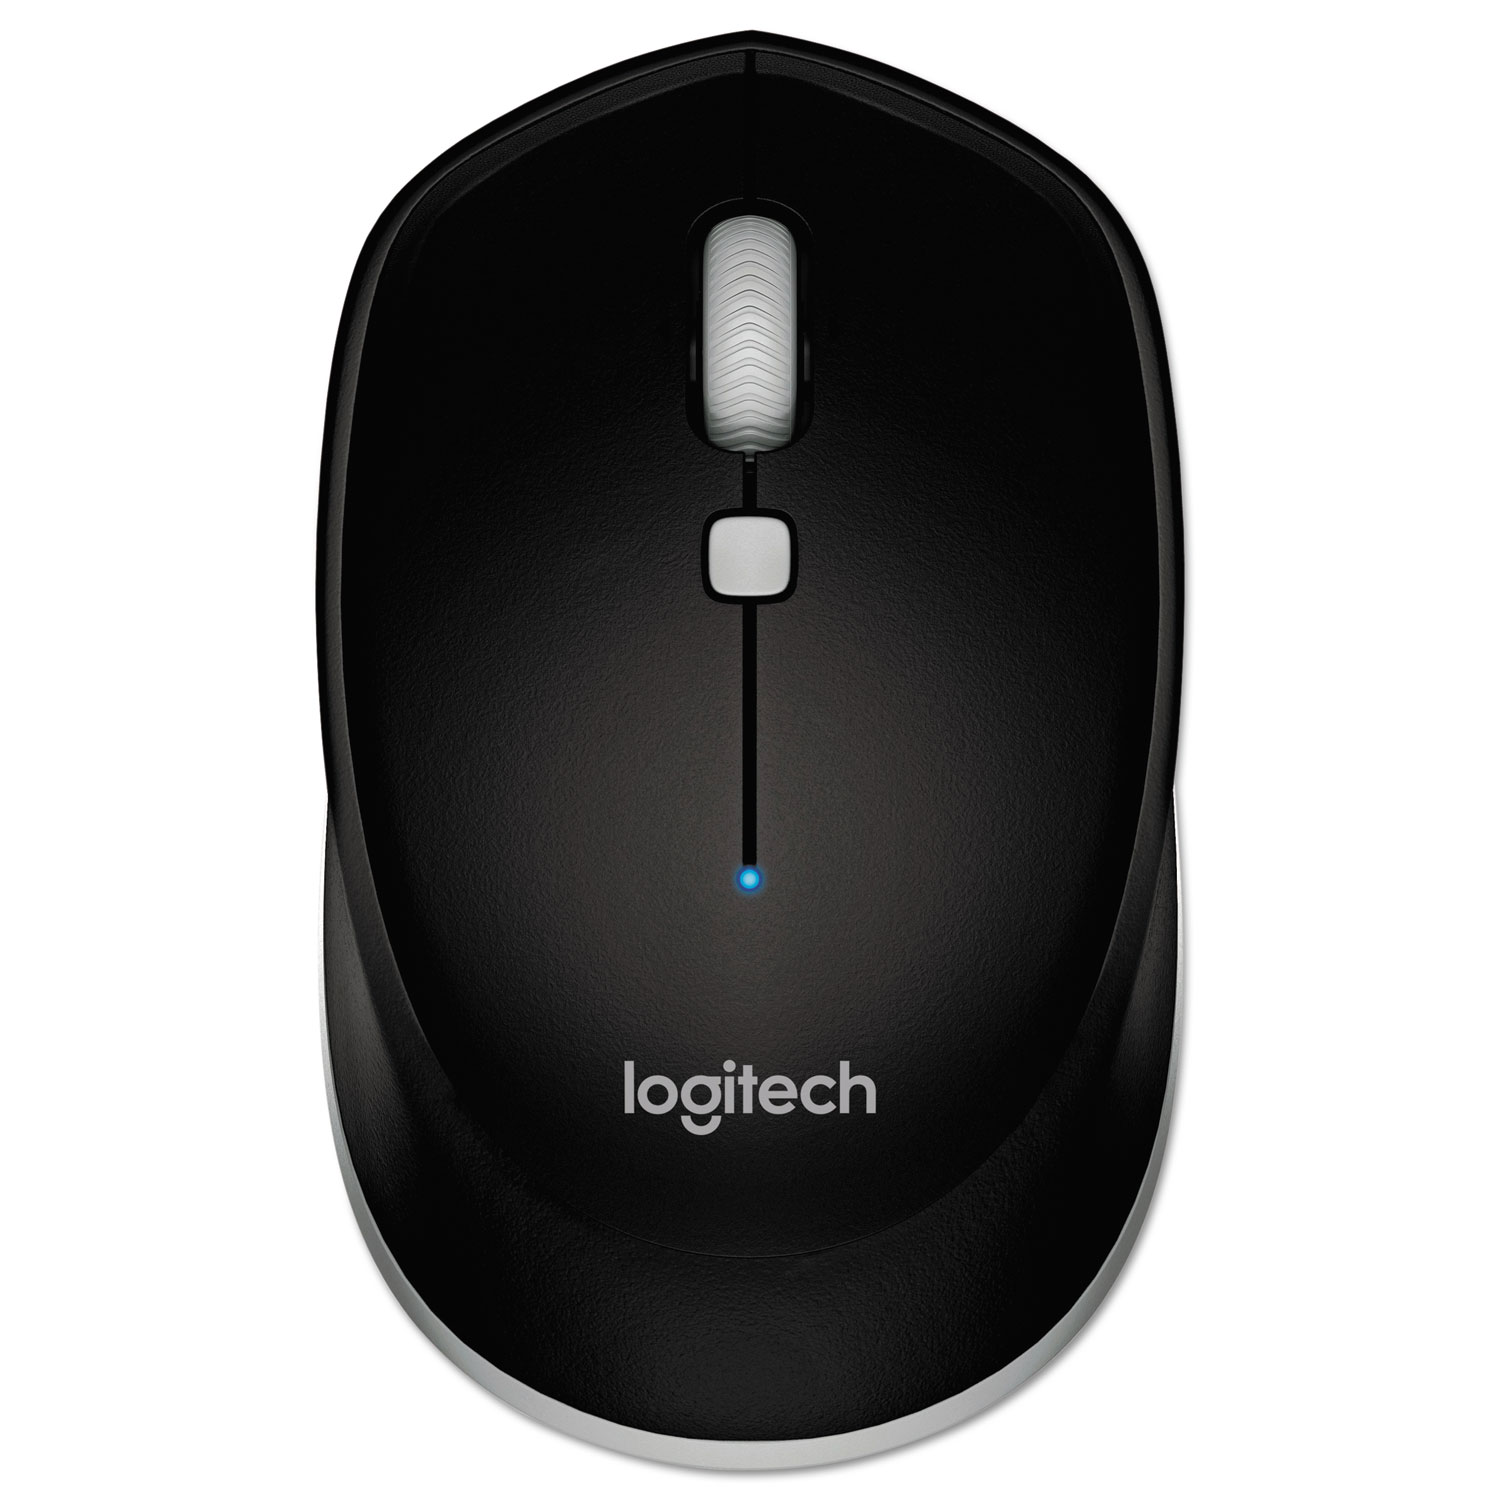  Logitech 910-004432 M535 Bluetooth Mouse, 2.45 GHz Frequency/30 ft Wireless Range, Right Hand Use, Black (LOG910004432) 